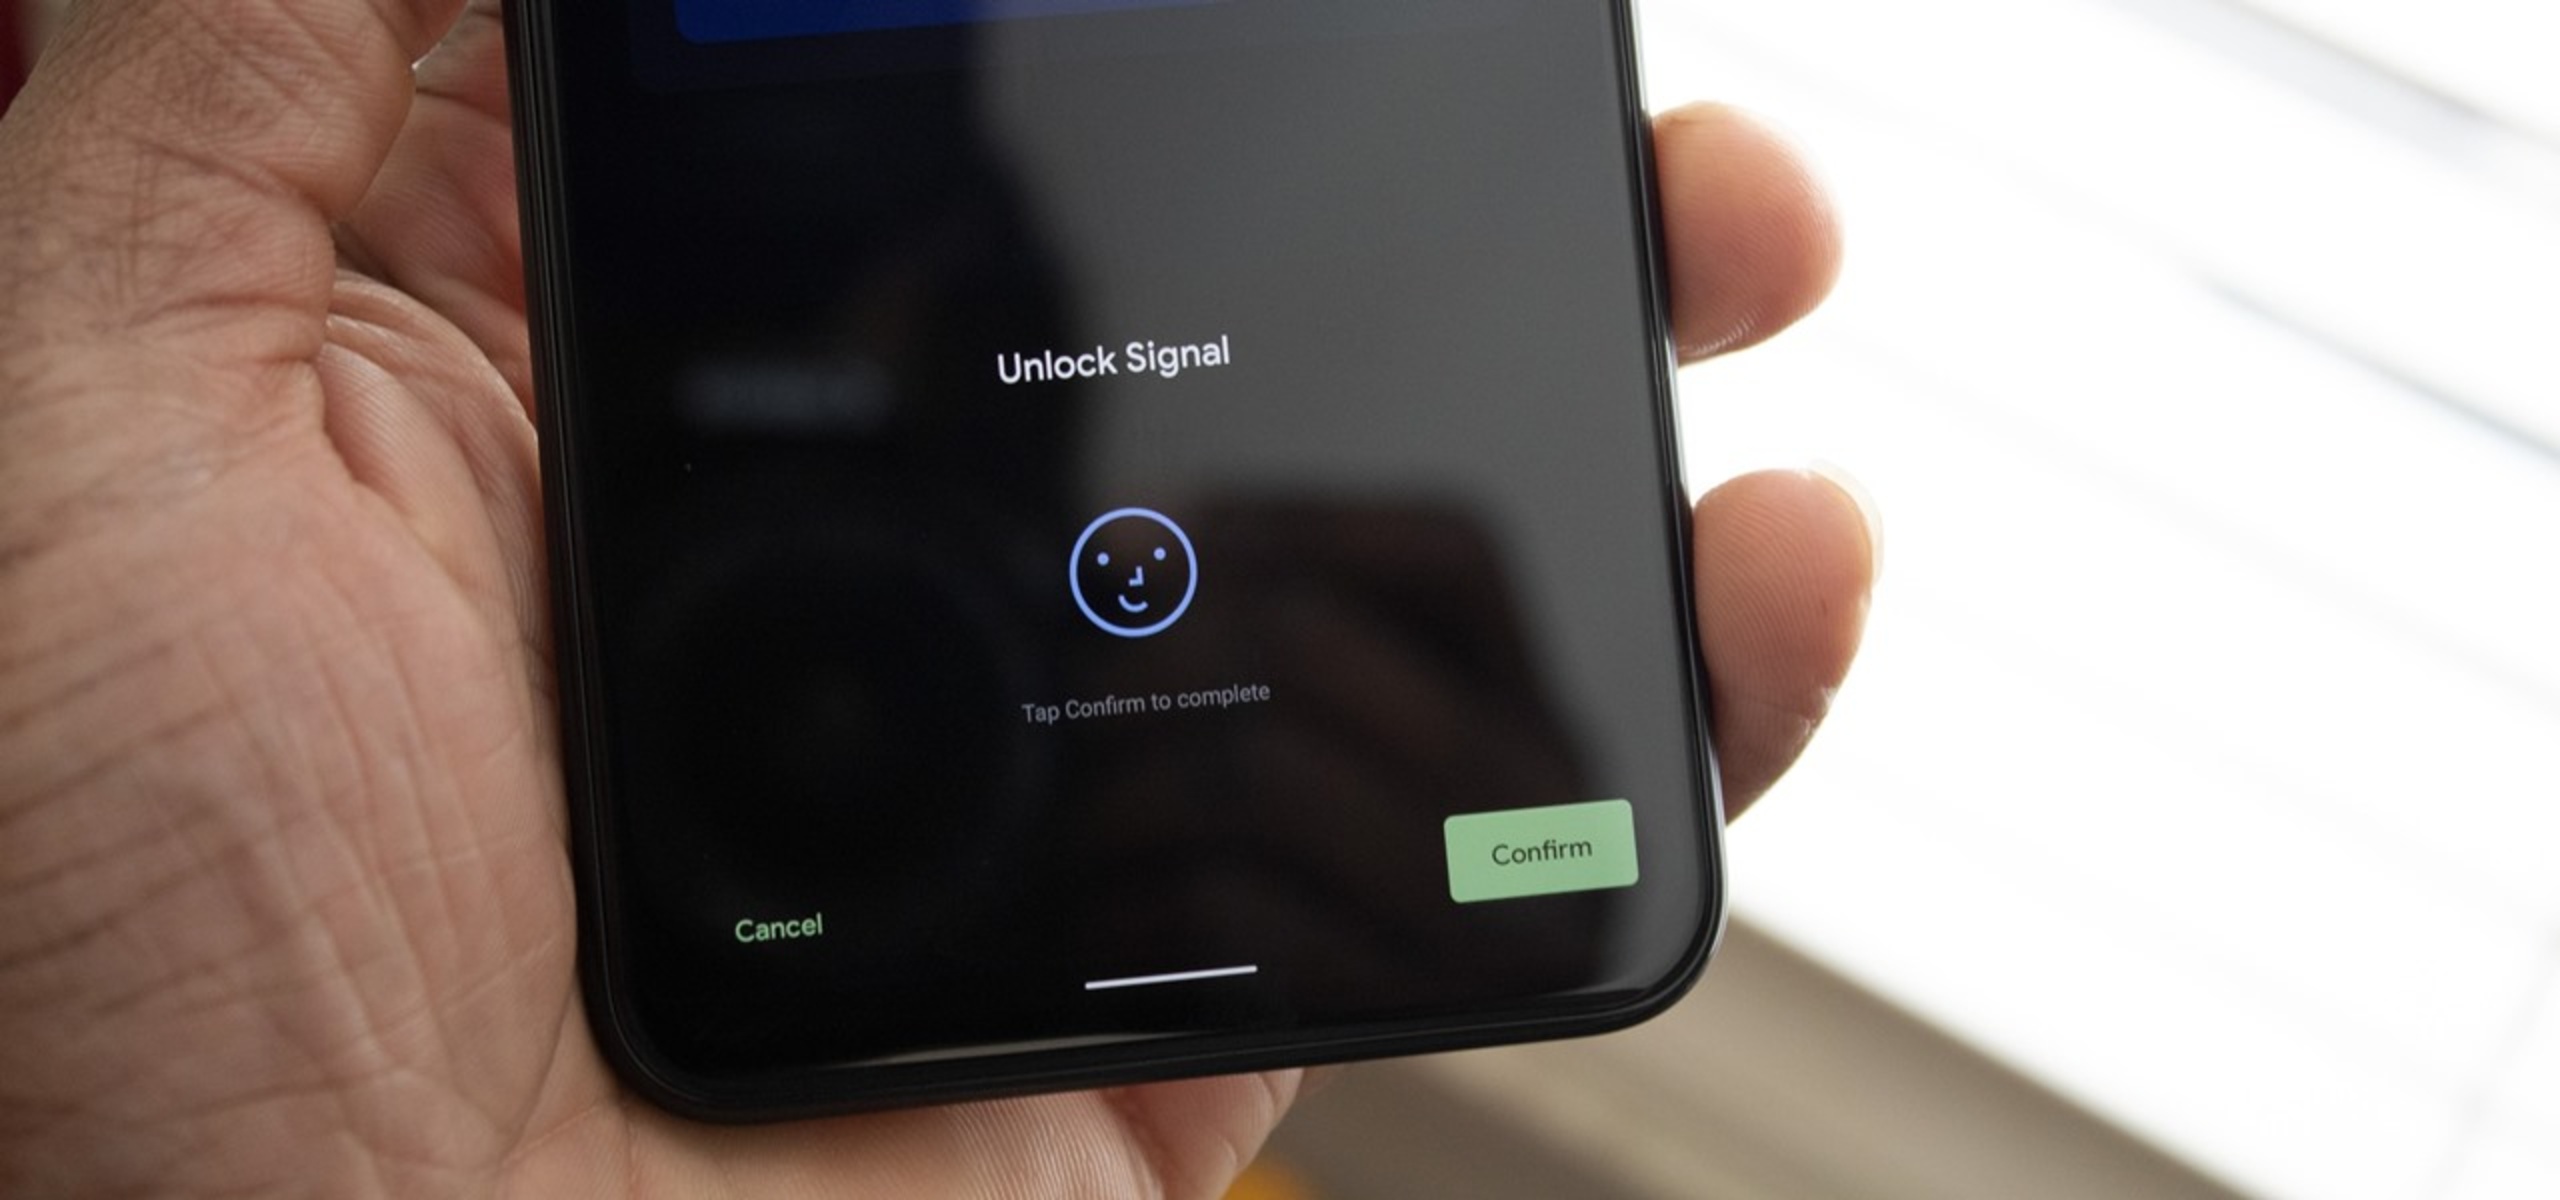 Decoding The Lock Symbol On Pixel 4: A Guide